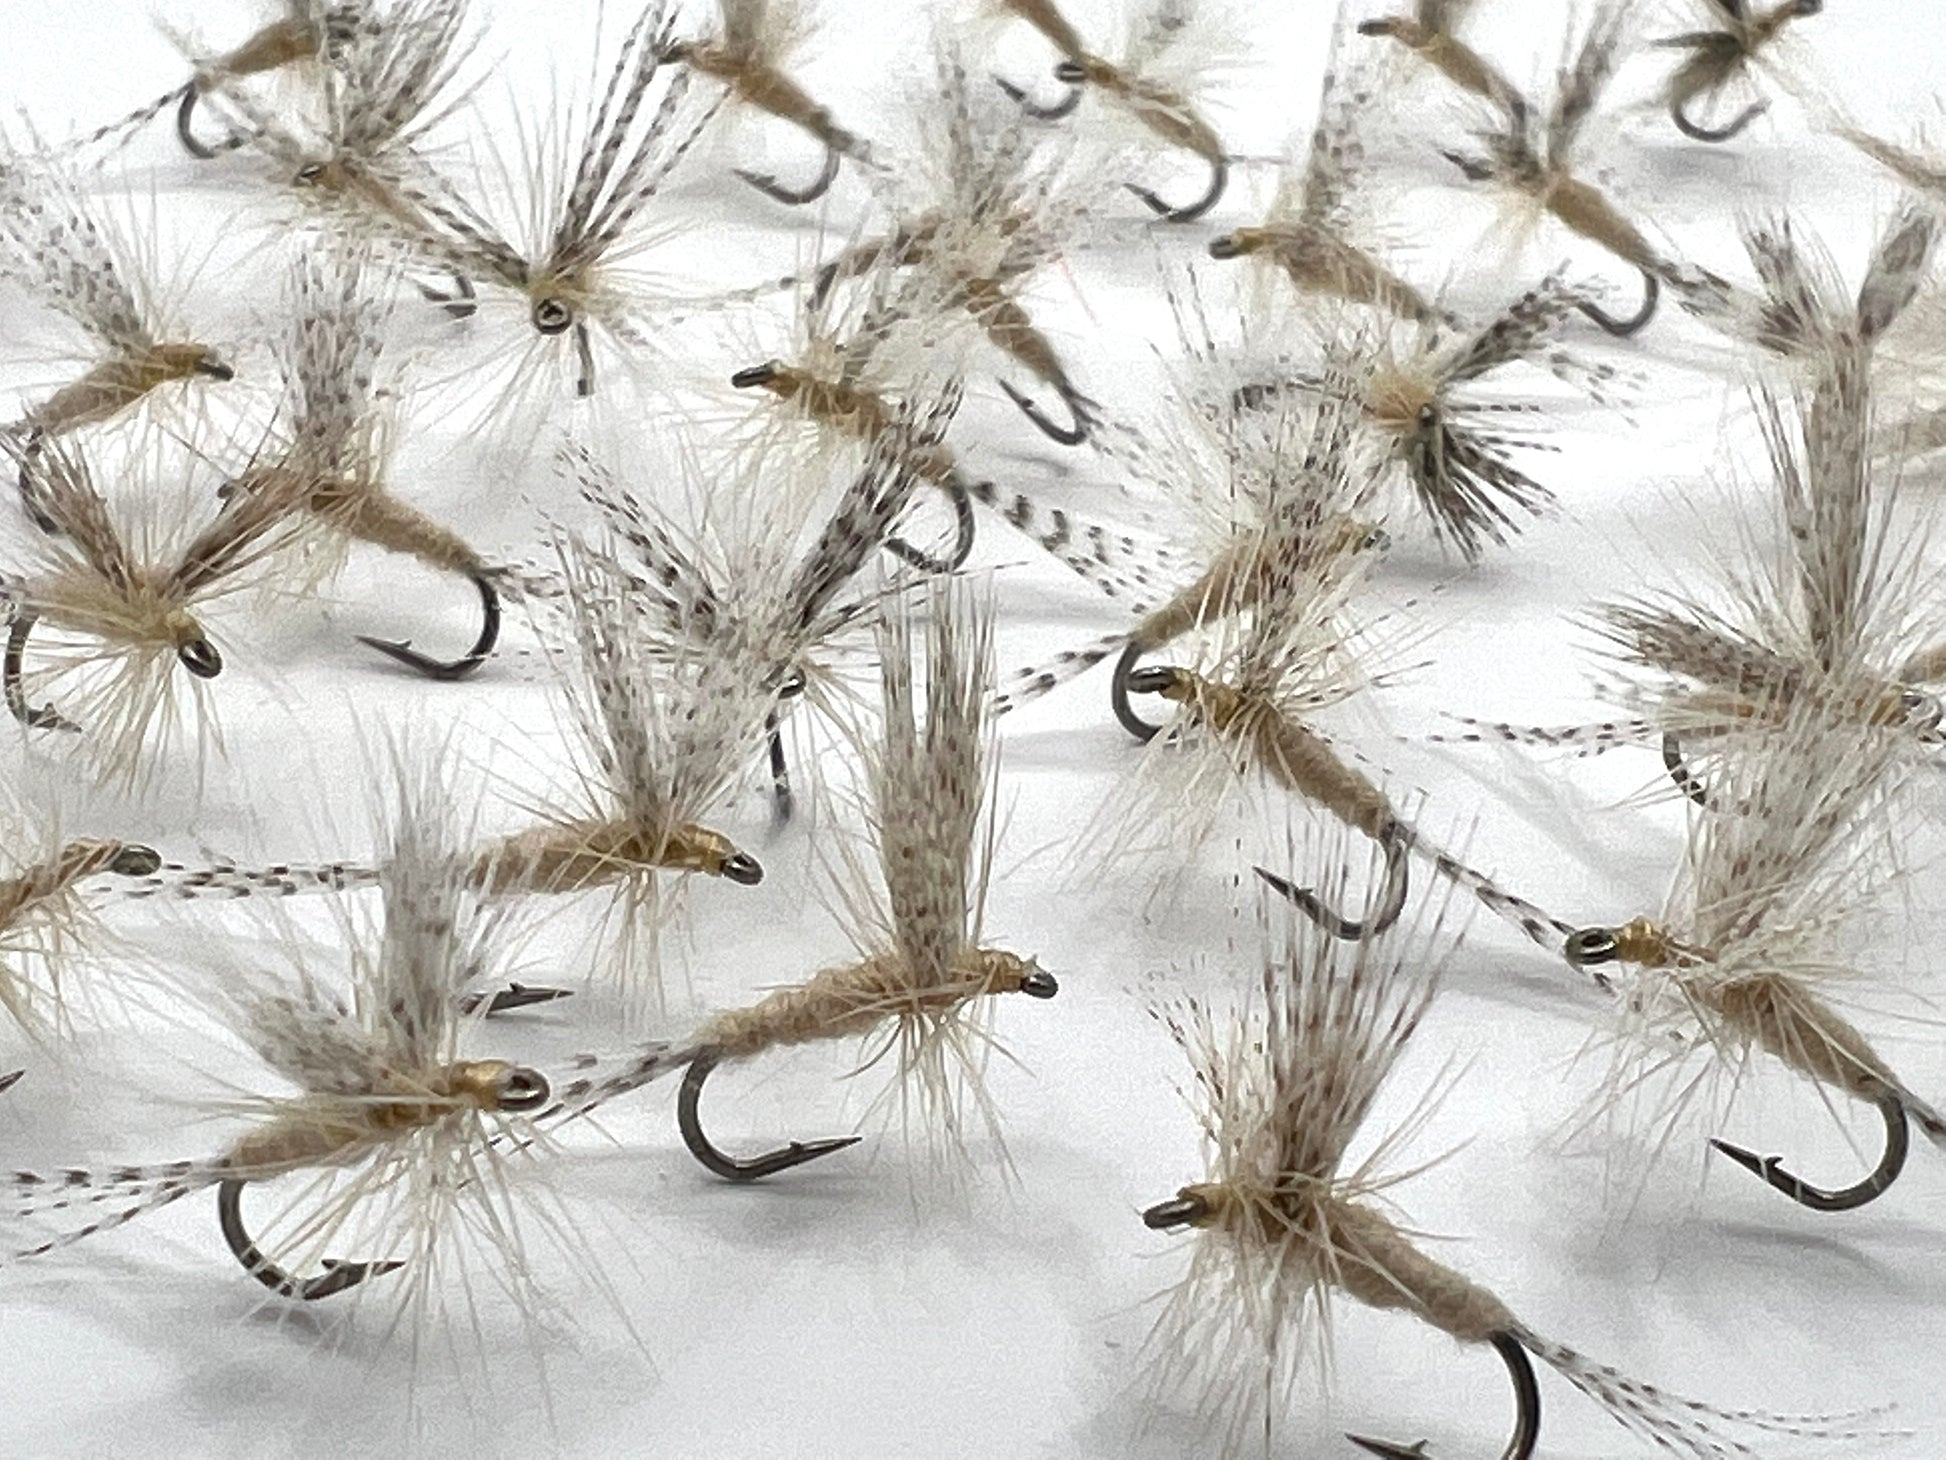 Size 16 Light Cahill Dry Flies – theflydoctor